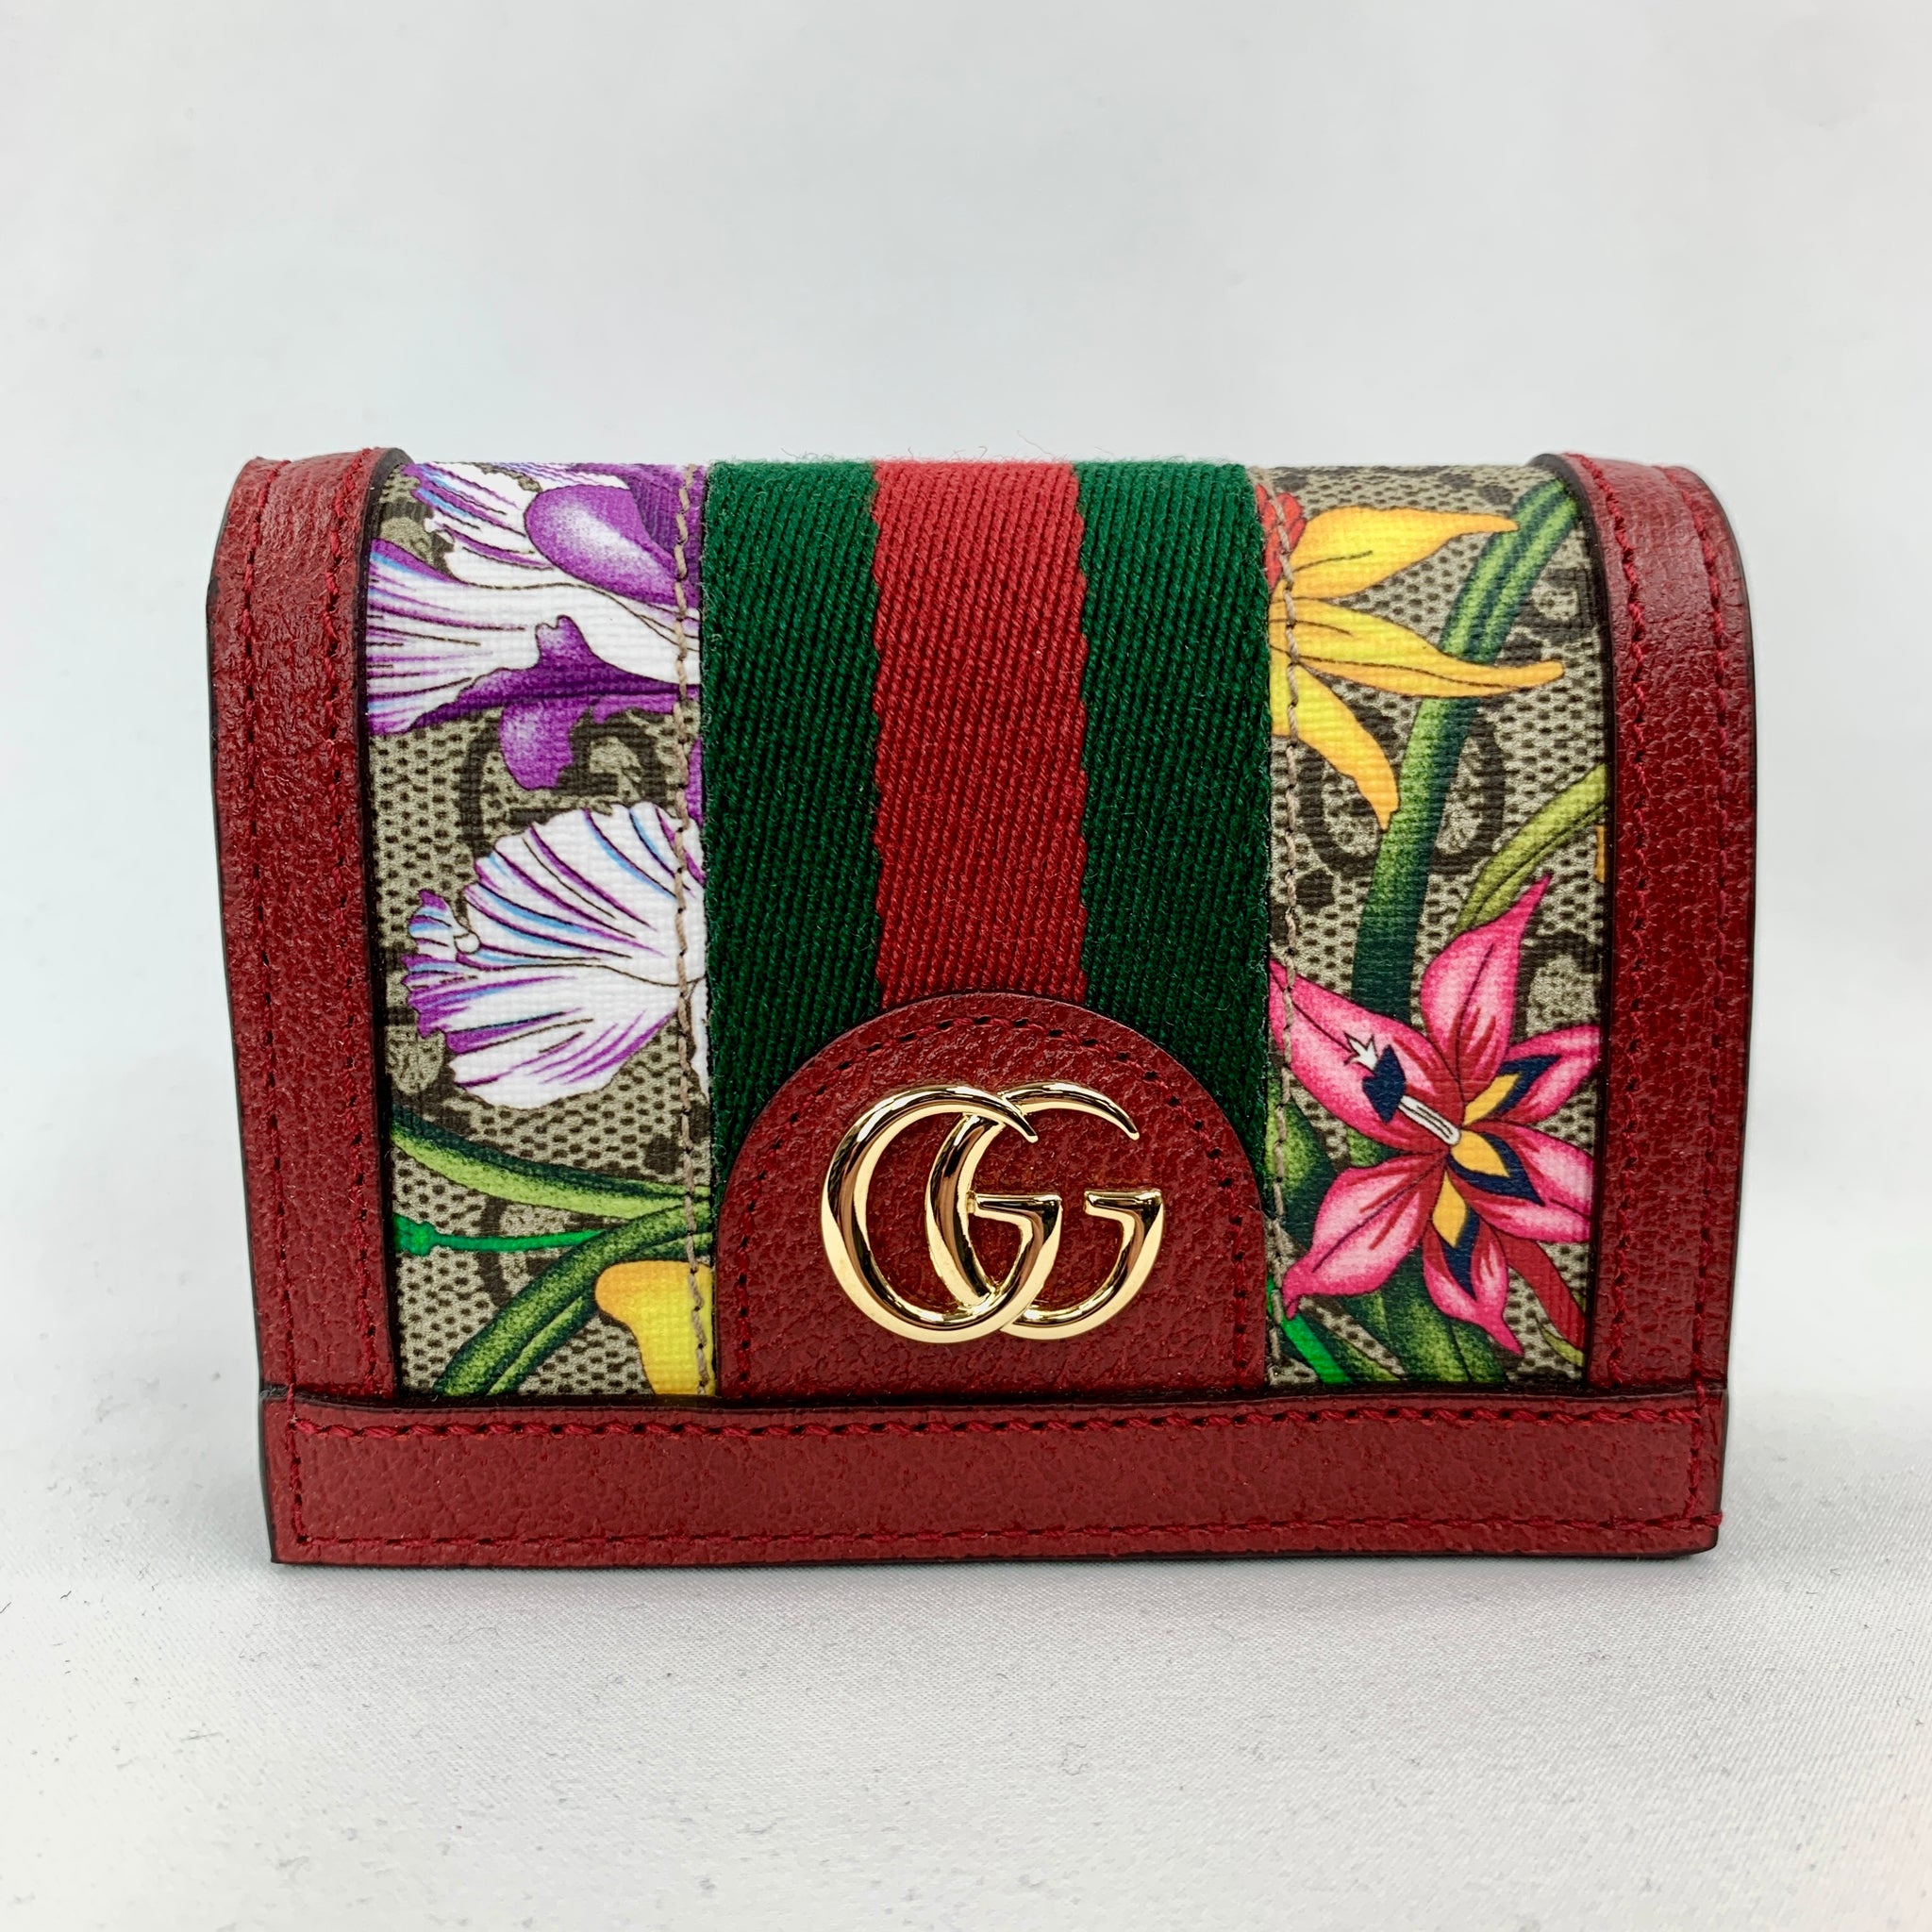 Gucci Ophidia Gg Flora Card Case With Lanyard In Beige Ebony & Red